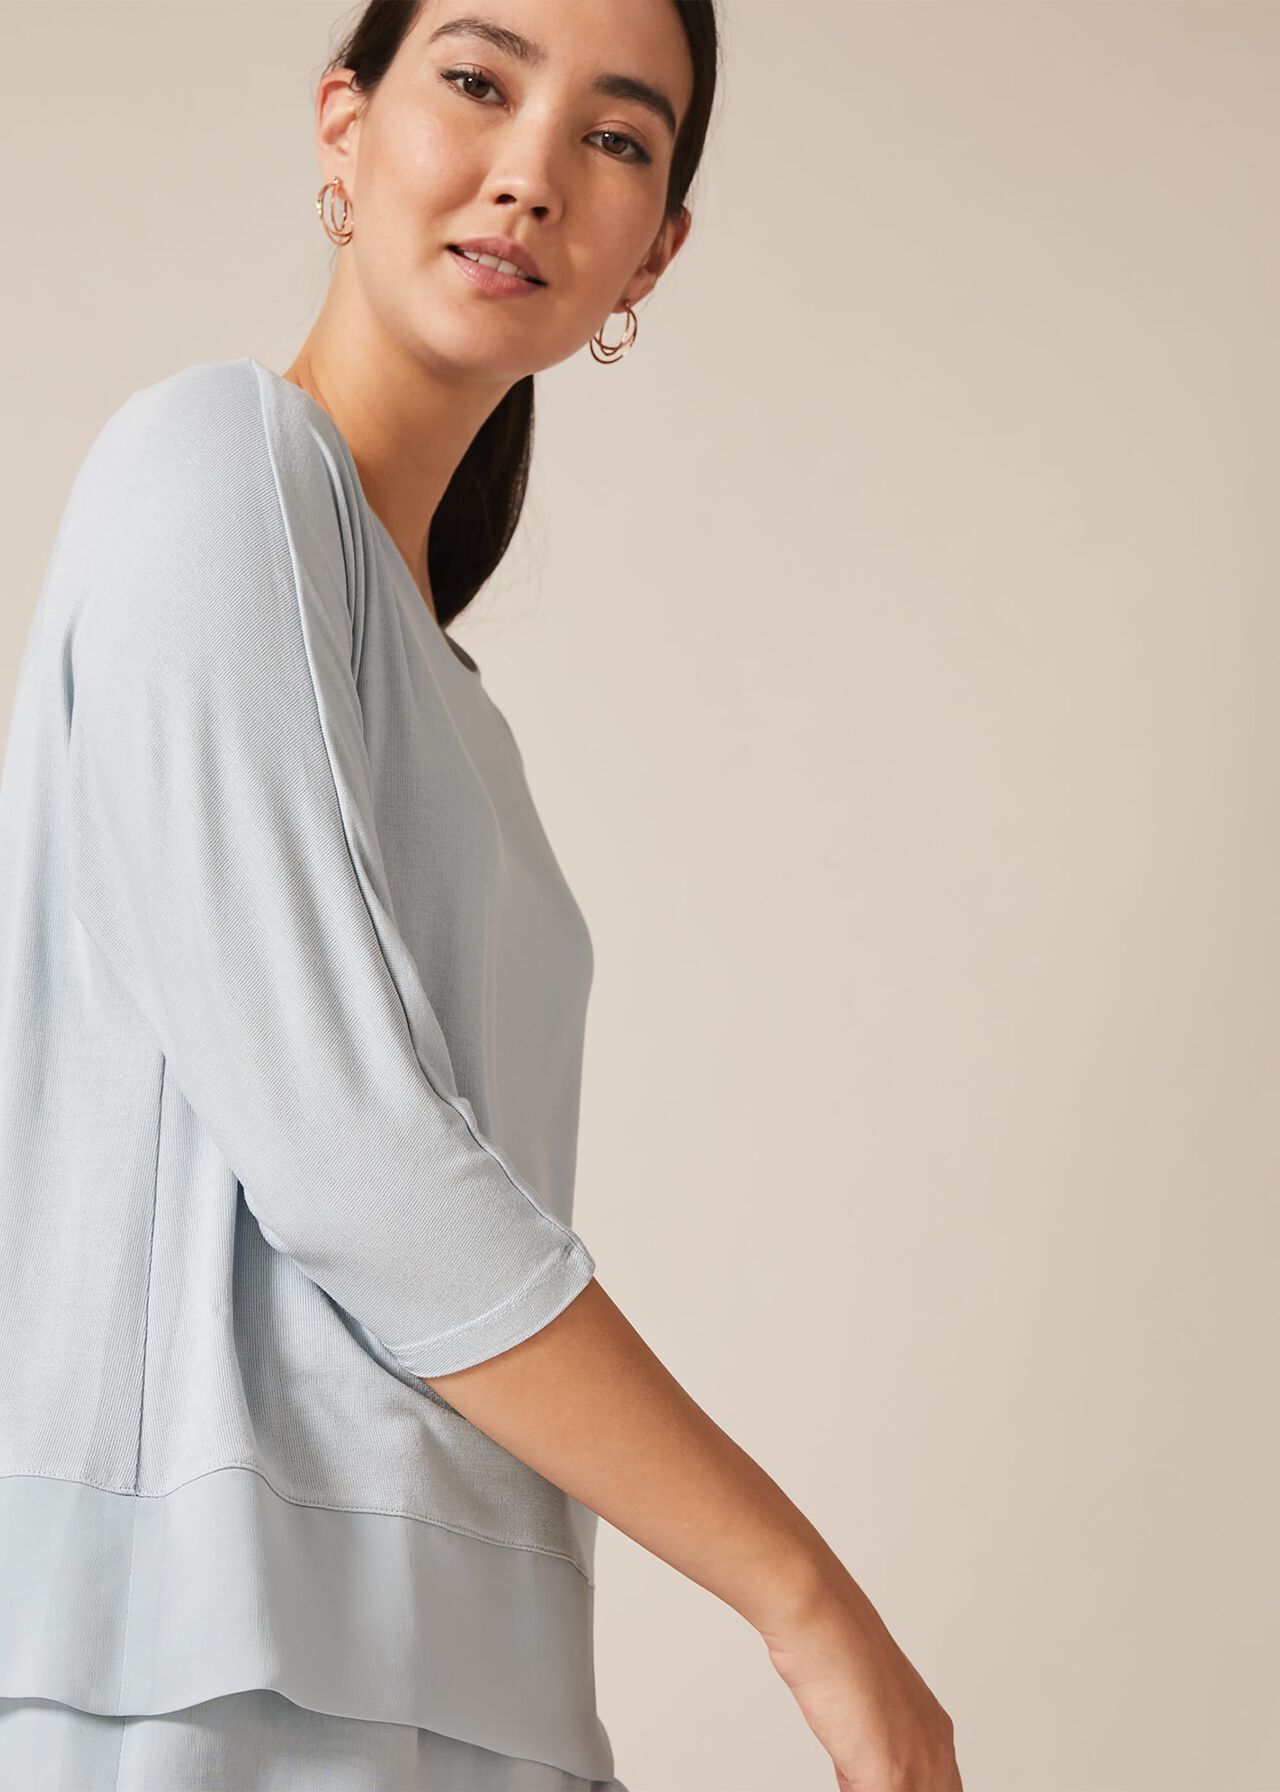 Rosalind Double Layer Top